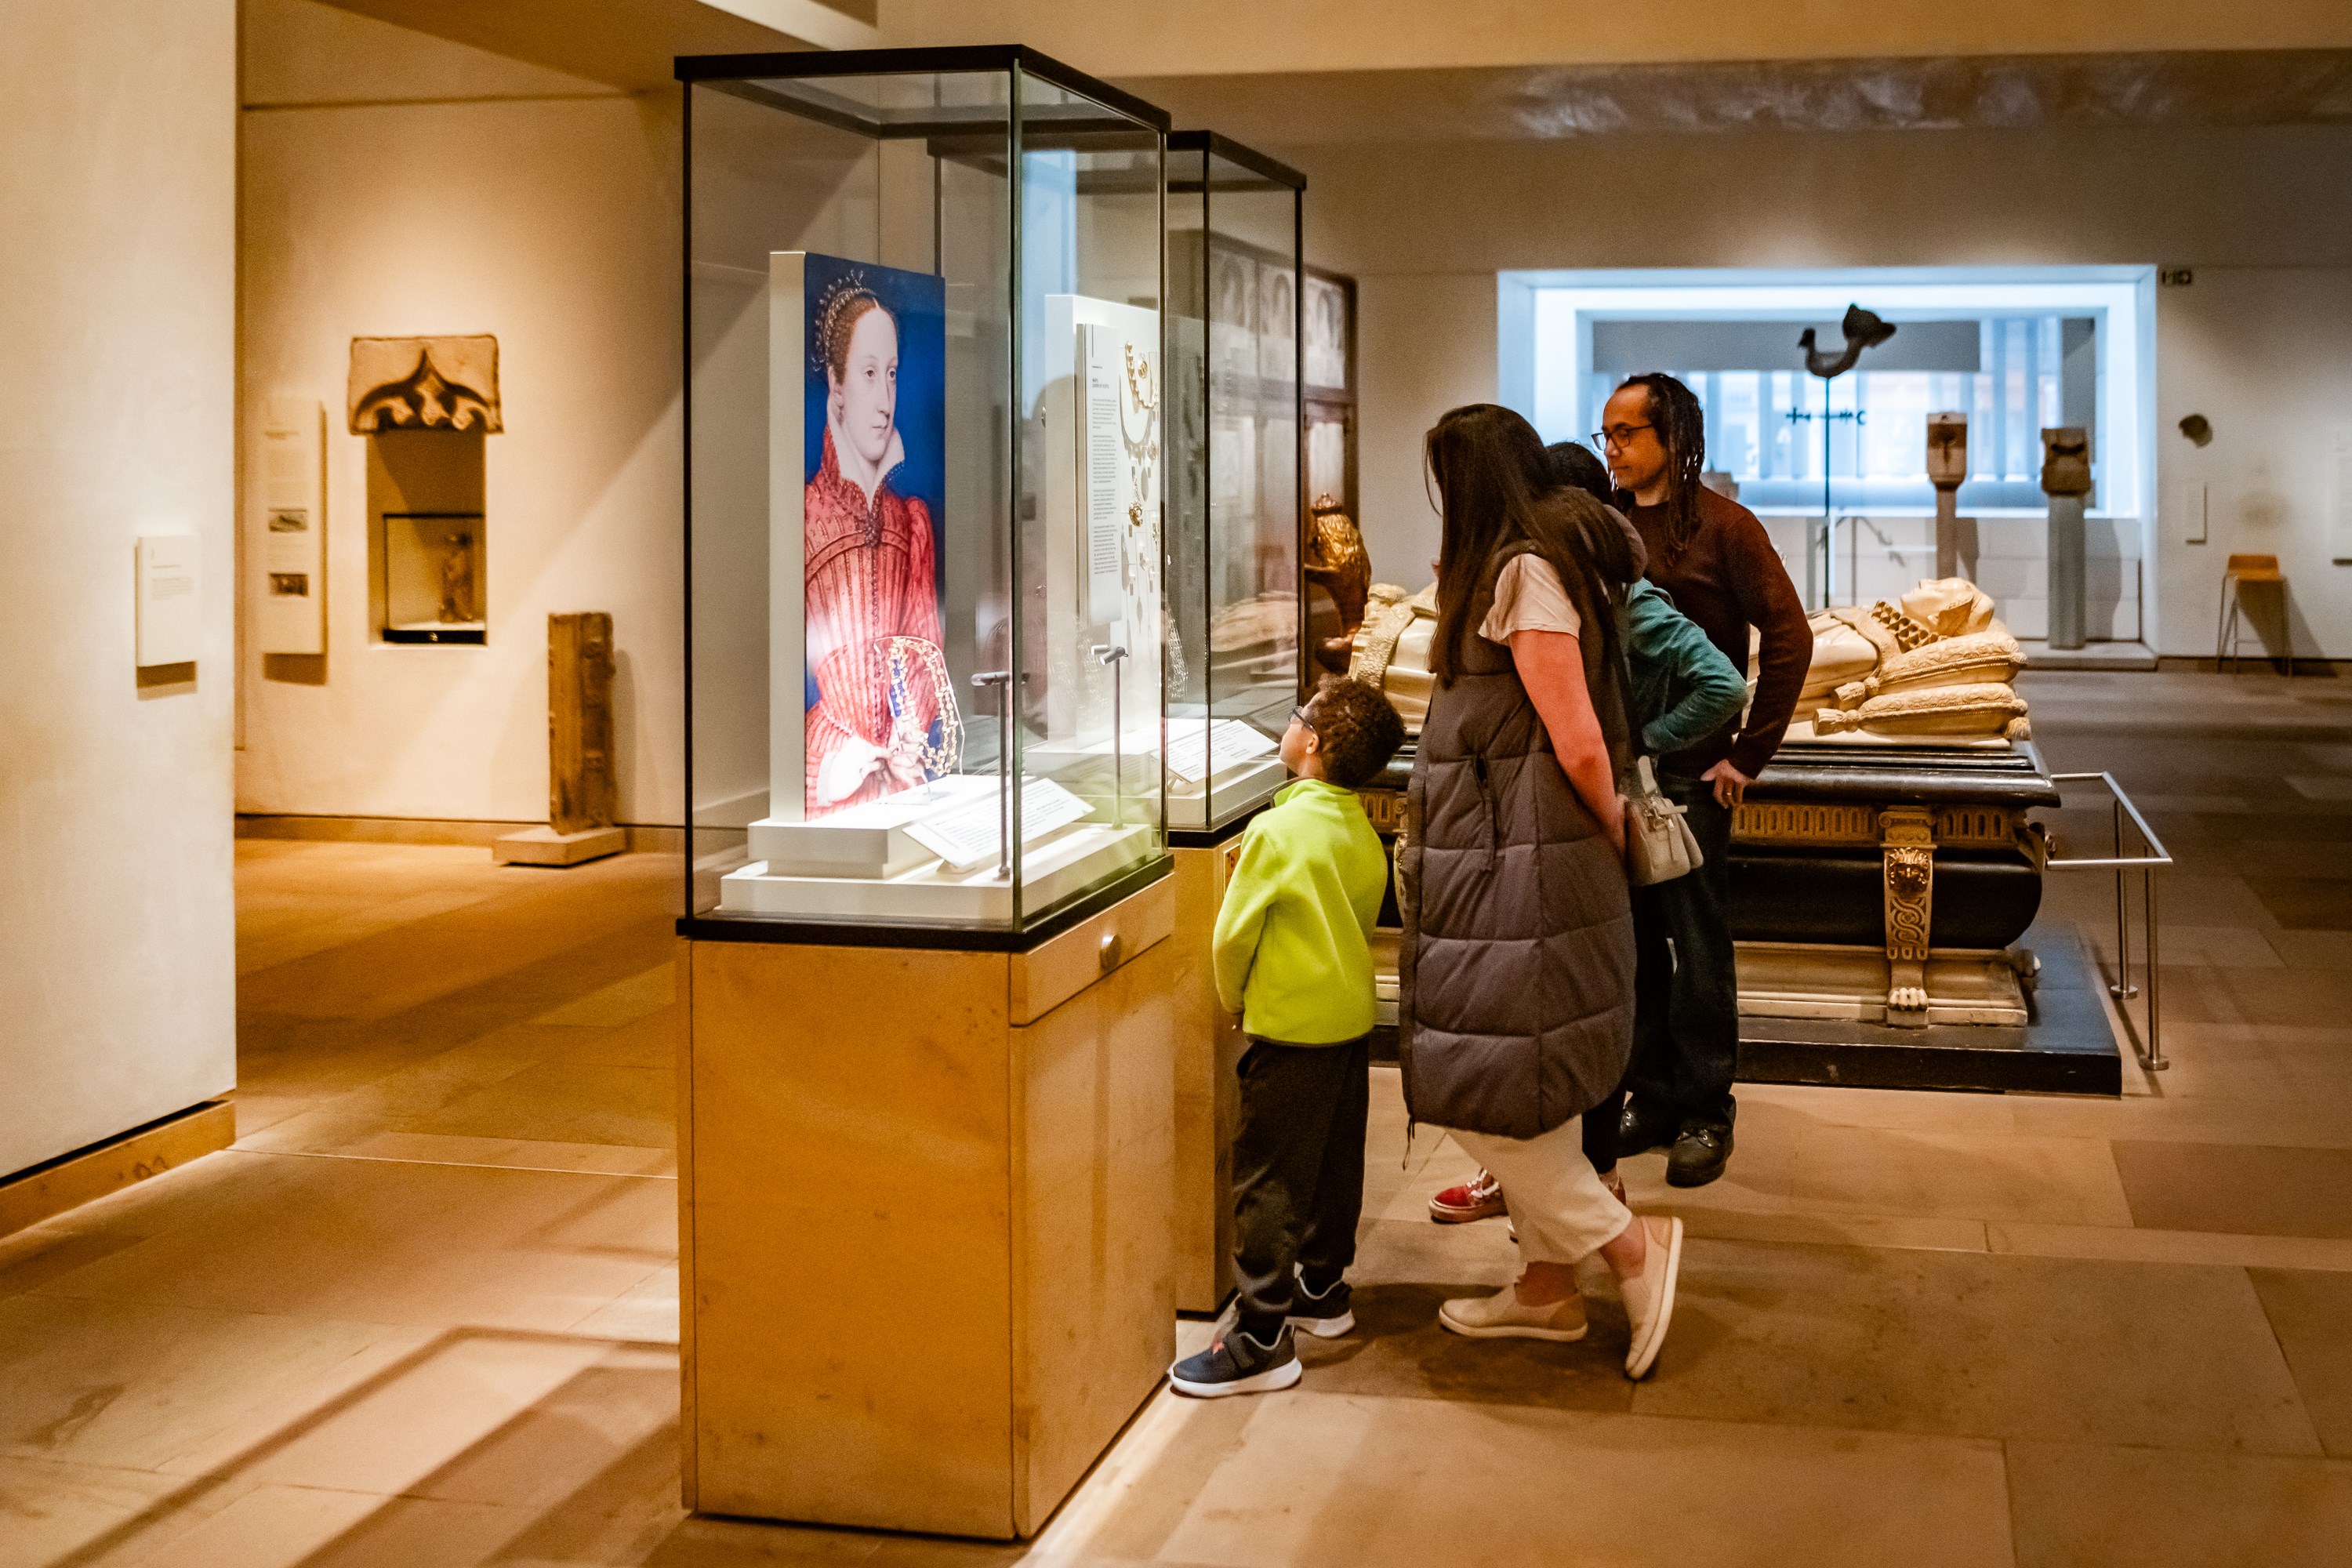 A group of visitors looking at jewellery in a case display